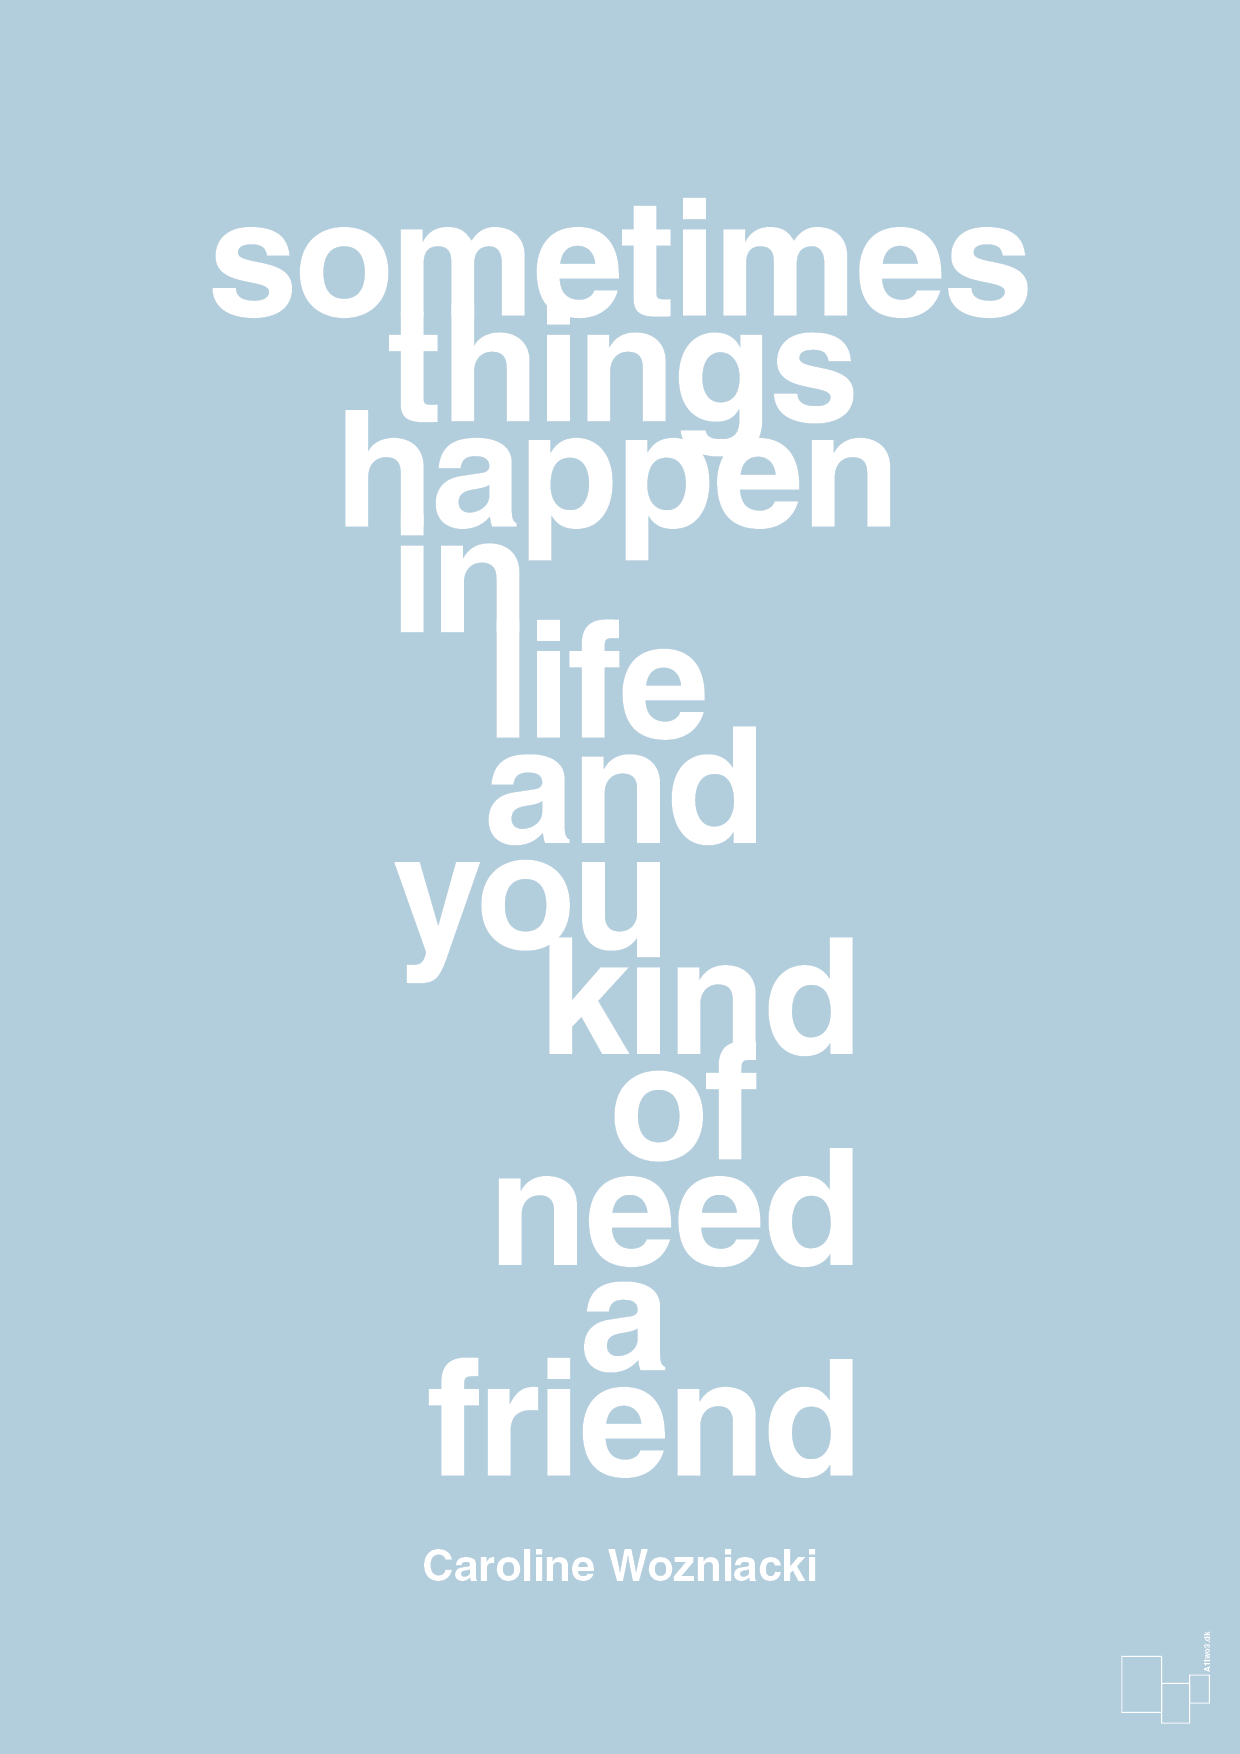 sometimes things happen in life and you kind of need a friend - Plakat med Citater i Heavenly Blue